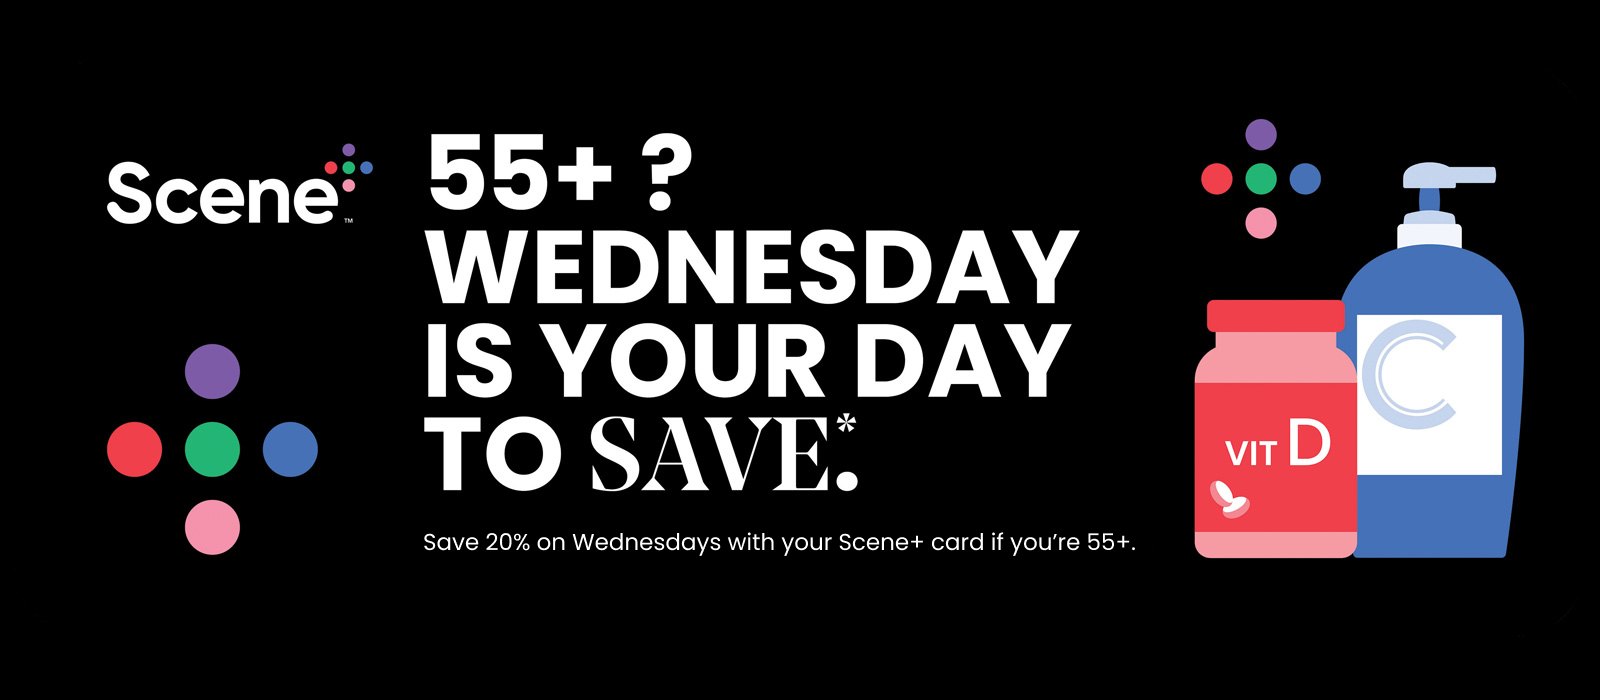 Text Reading 'Are you above 55? Then Wednesday is your day to save. Save 20% on Wednesdays with your Scene+ card if you are 55+.'